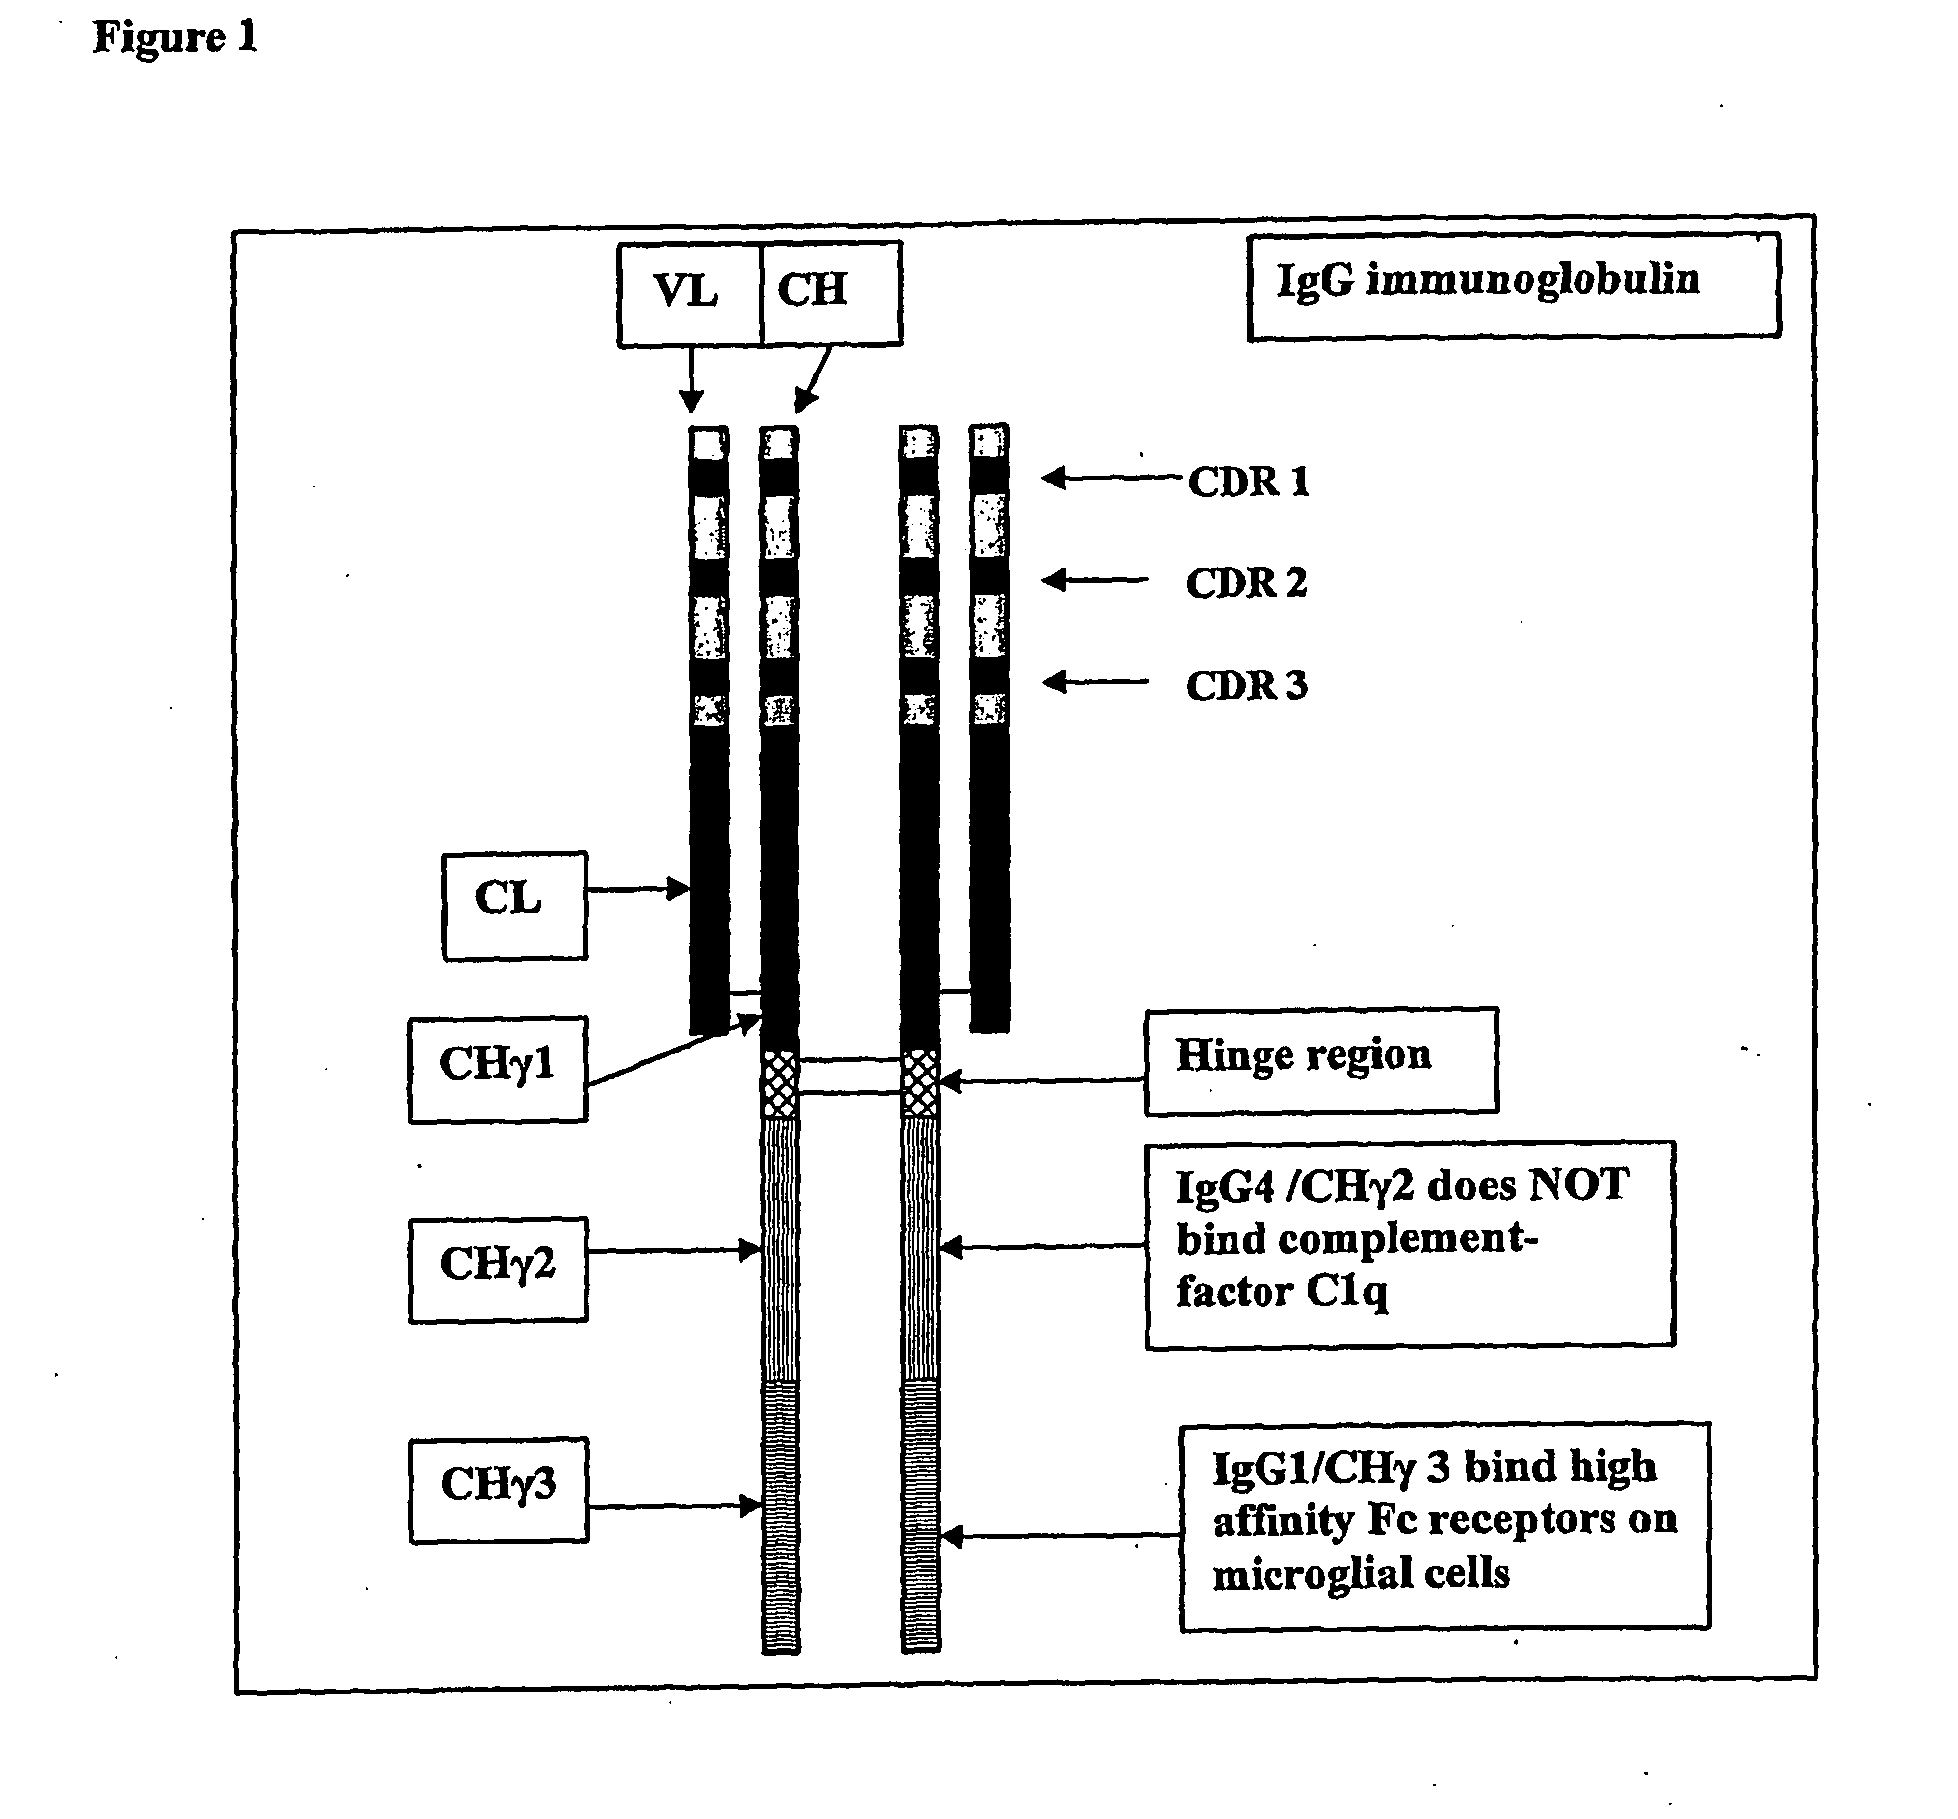 Protofibril selective antibodies and the use thereof